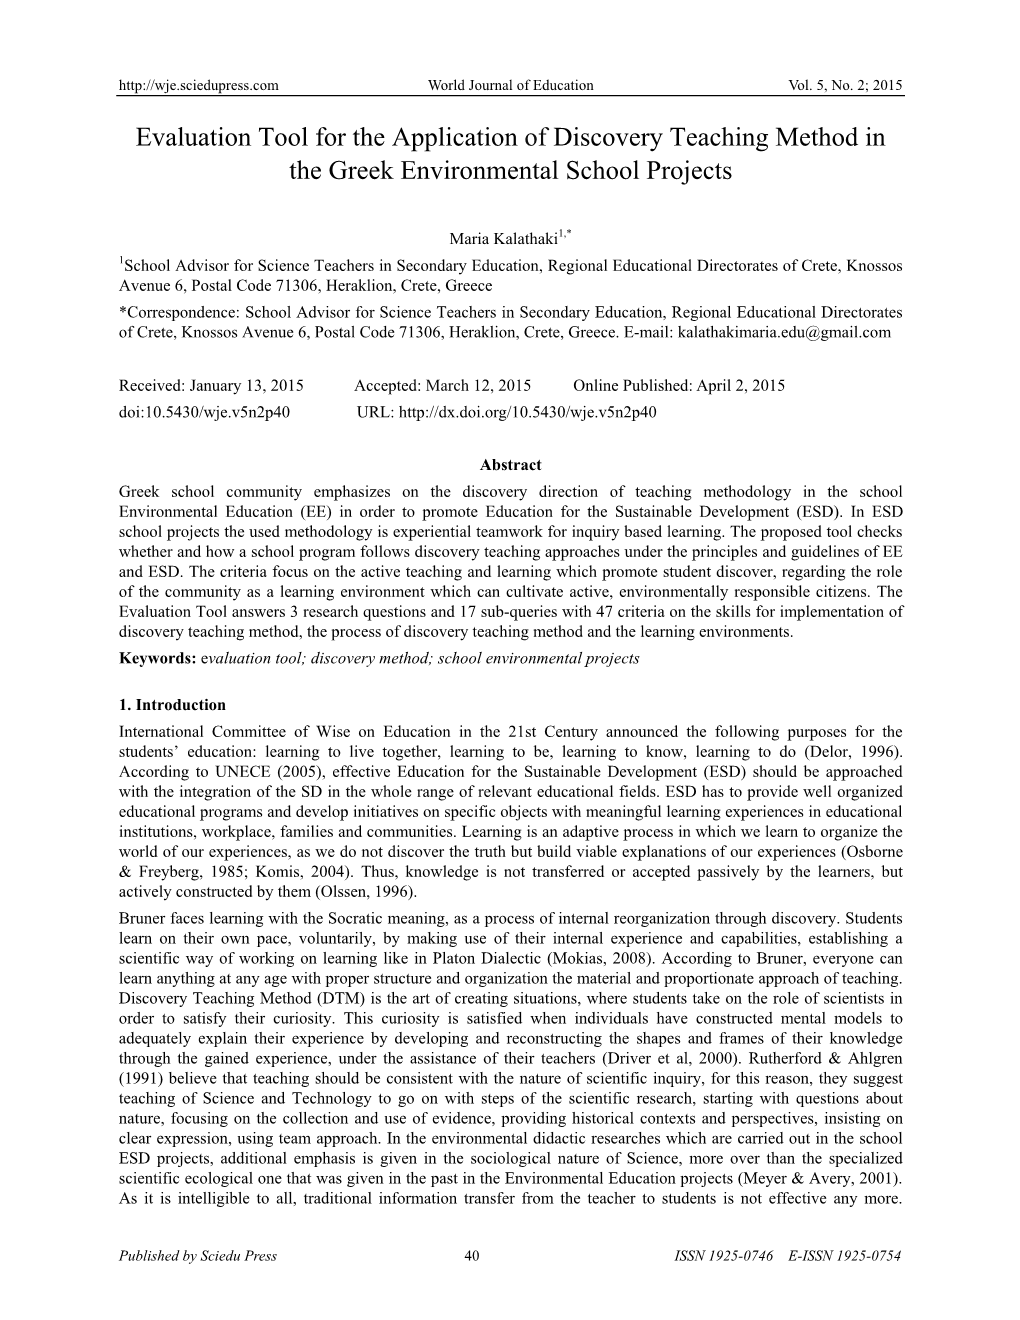 Evaluation Tool for the Application of Discovery Teaching Method in the Greek Environmental School Projects